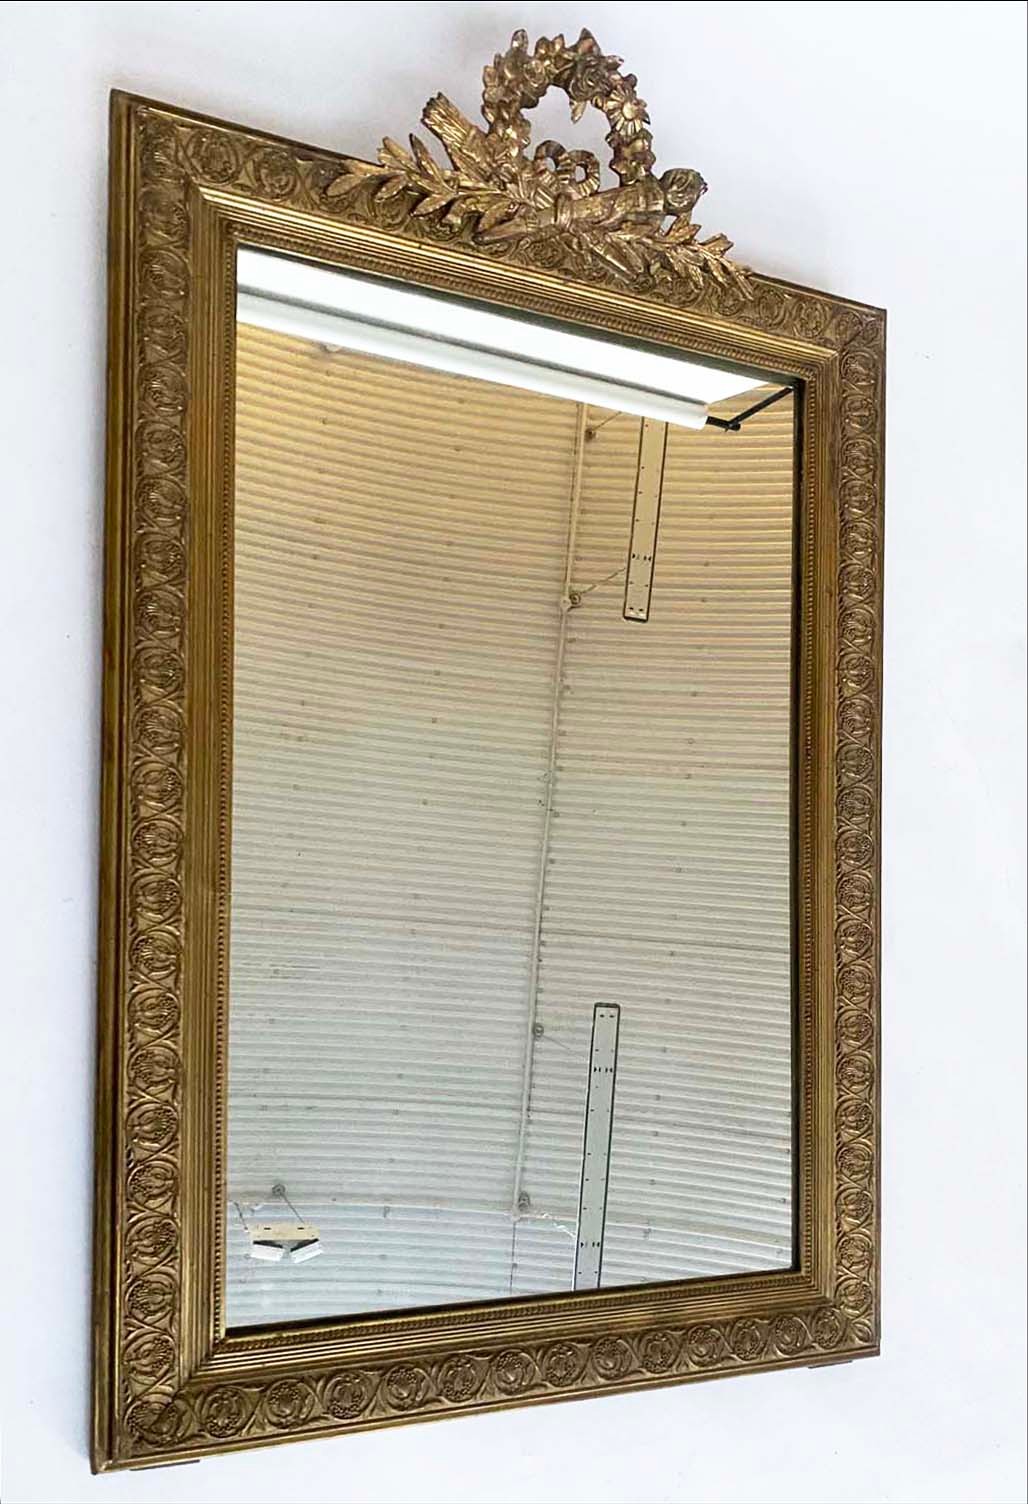 OVERMANTEL MIRROR, late 19th/early 20th century French giltwood and gesso moulded with quiver and